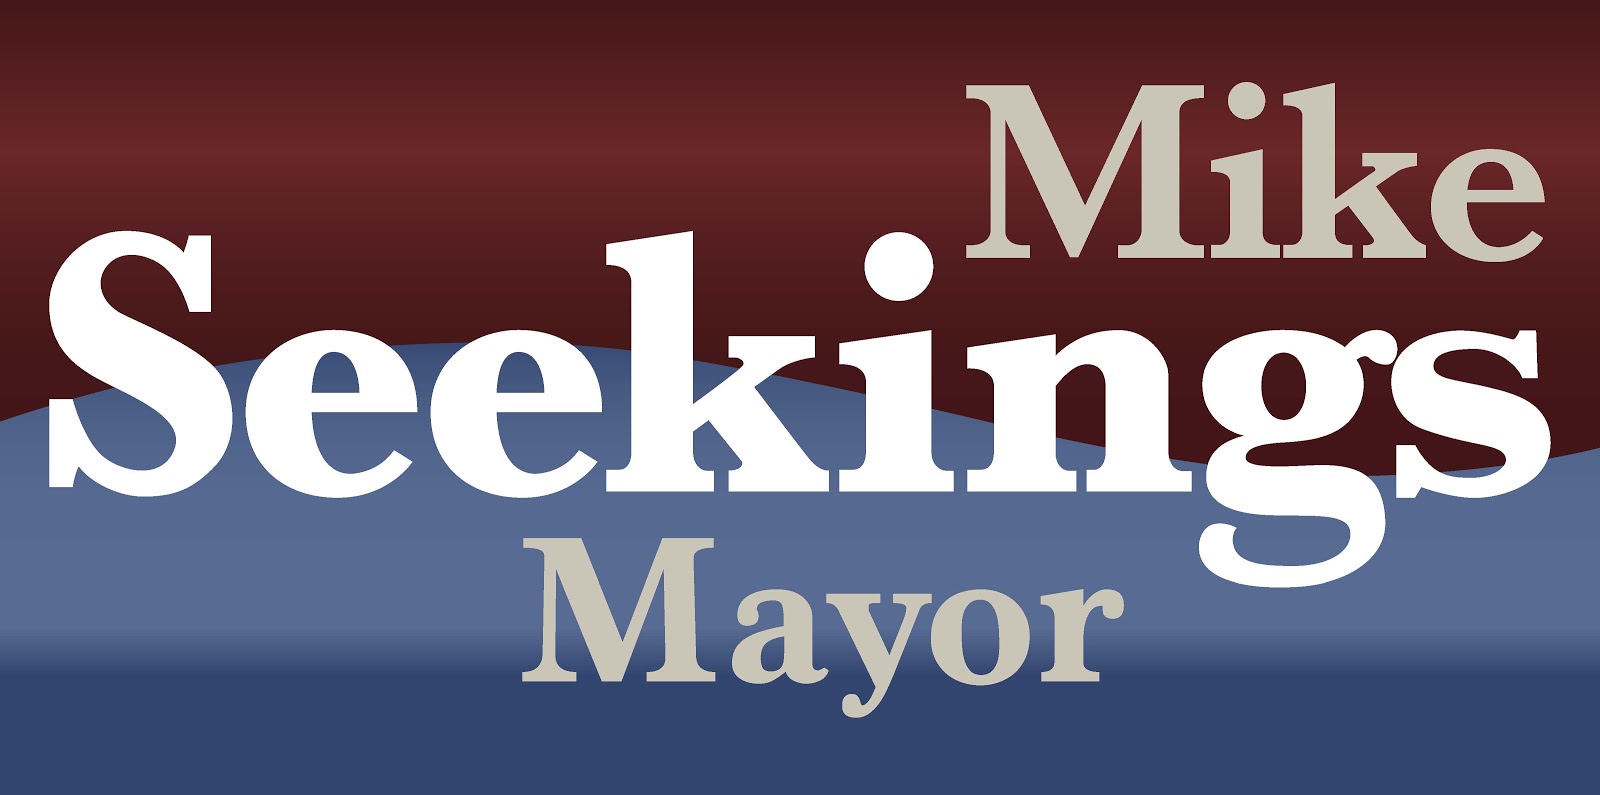 RELEASE – MIKE SEEKINGS POSTS $503K IN FIRST TWO MONTHS OF CHARLESTON MAYORAL RACE